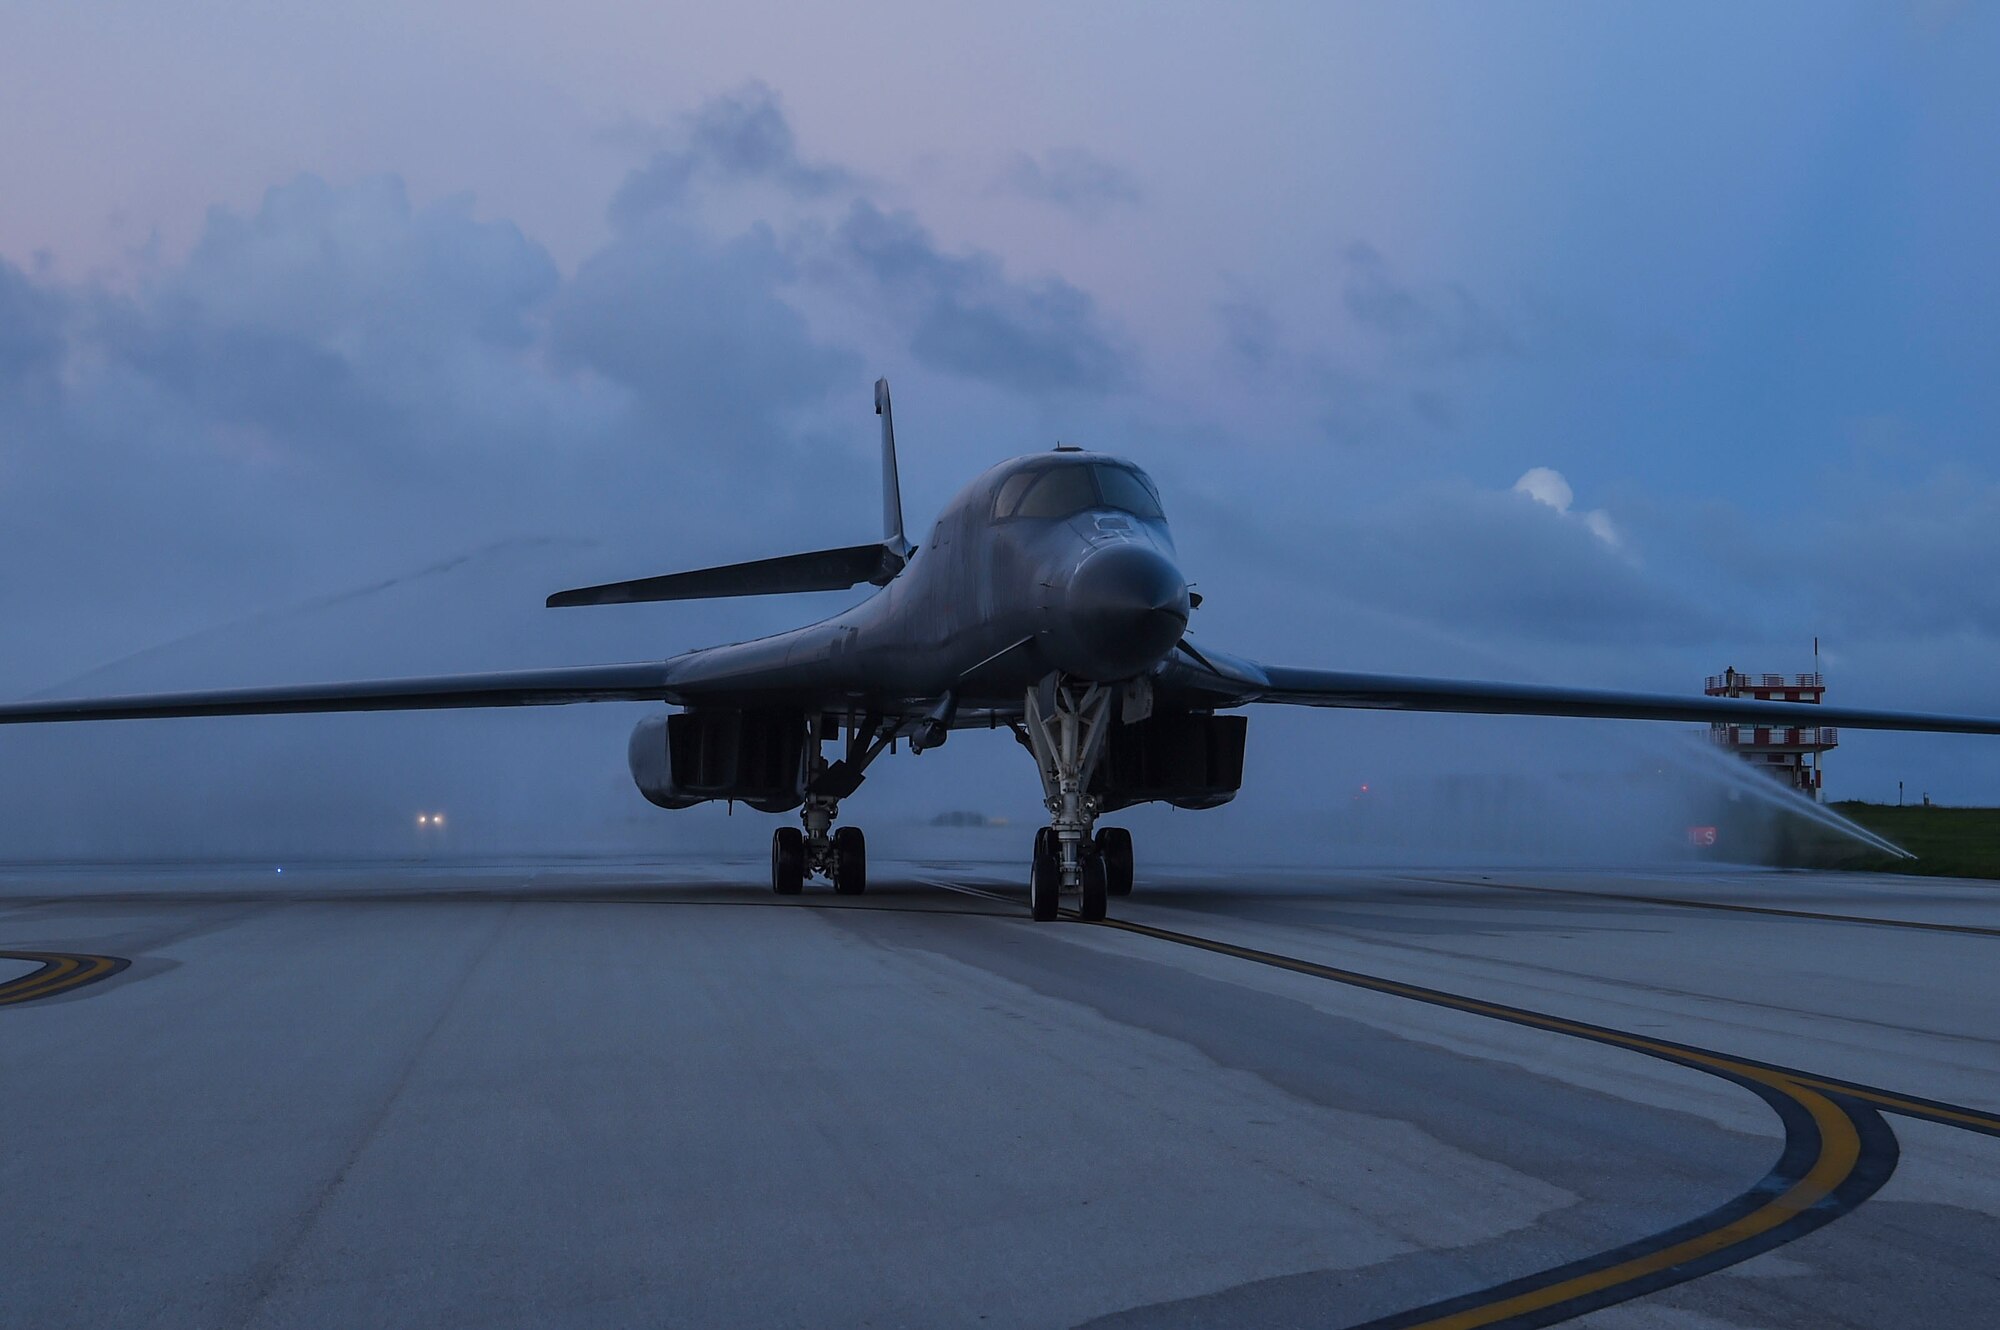 A water salute is performed as a B-1B Lancer aircraft taxis during a Bomber Task Force deployment at Andersen Air Force Base, Guam, Oct. 21, 2020.